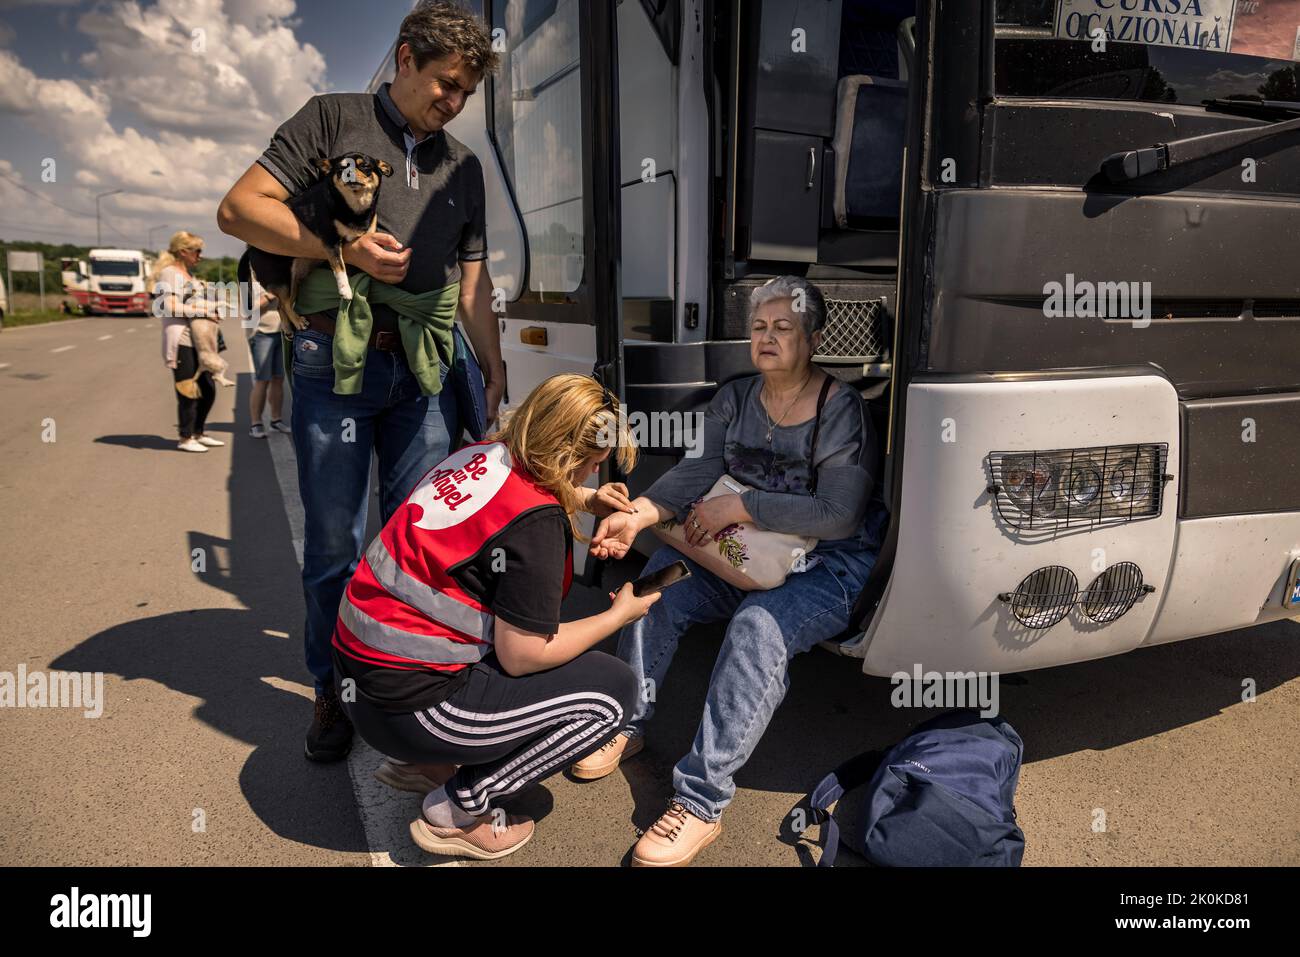 One refugee has to be treated for circulatory collapse during border clearance. Two buses left Mykolaiv in Ukraine to evacuate 110 refugees from the combat zone in Mykolaiv and the surrounding area. The refugees bid a tearful farewell to their relatives, who remained behind, before beginning their journey to Chisinau in Moldova. Stock Photo